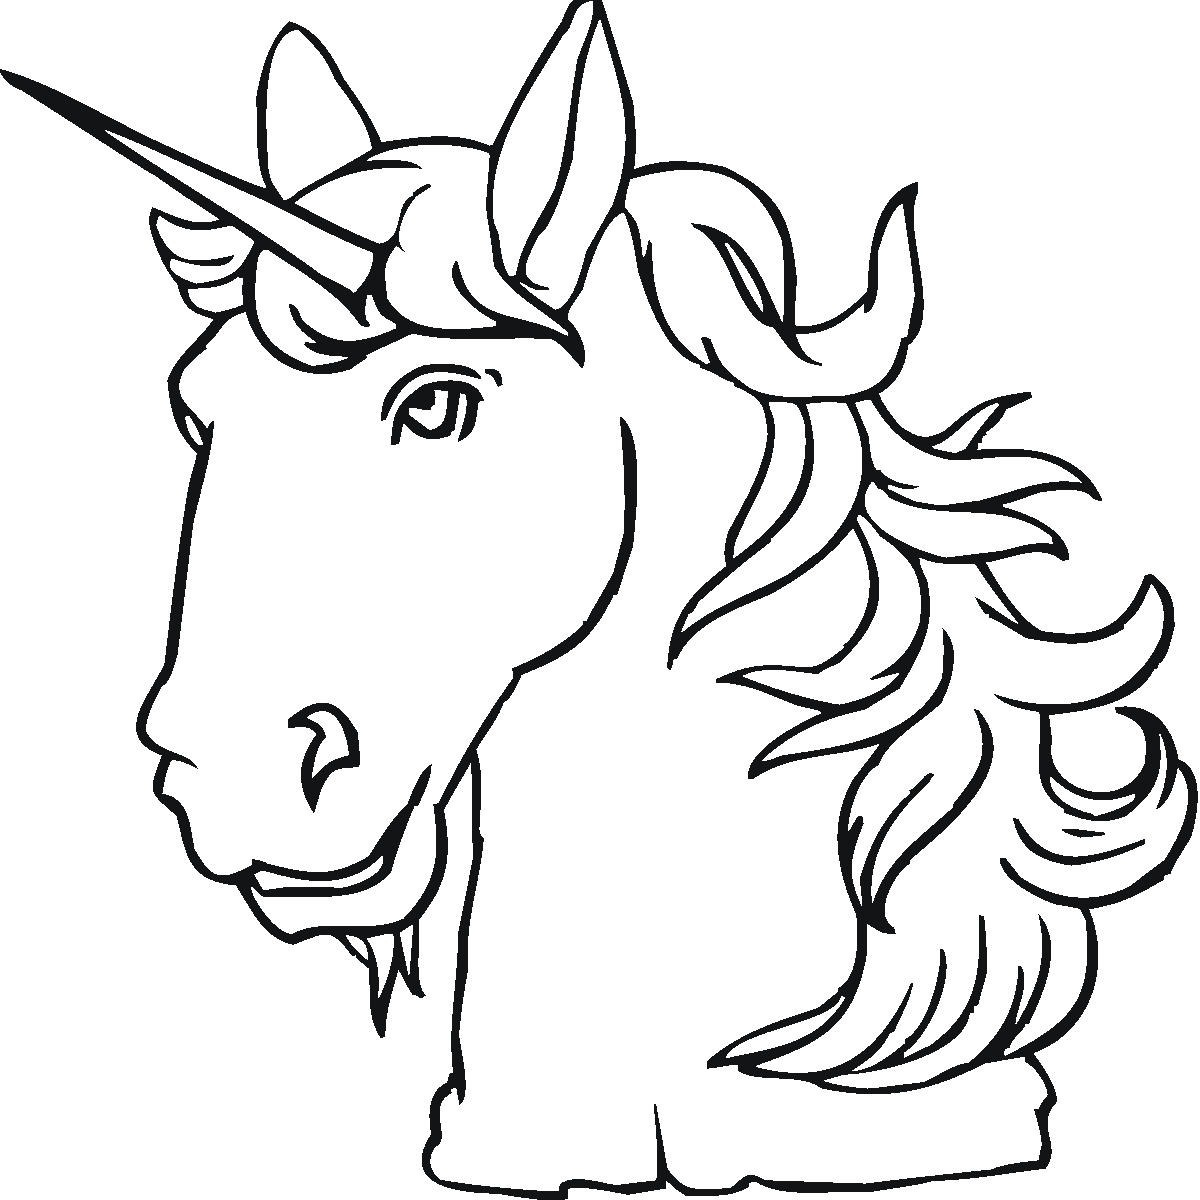 Printable Unicorn Pictures For Kids To Color